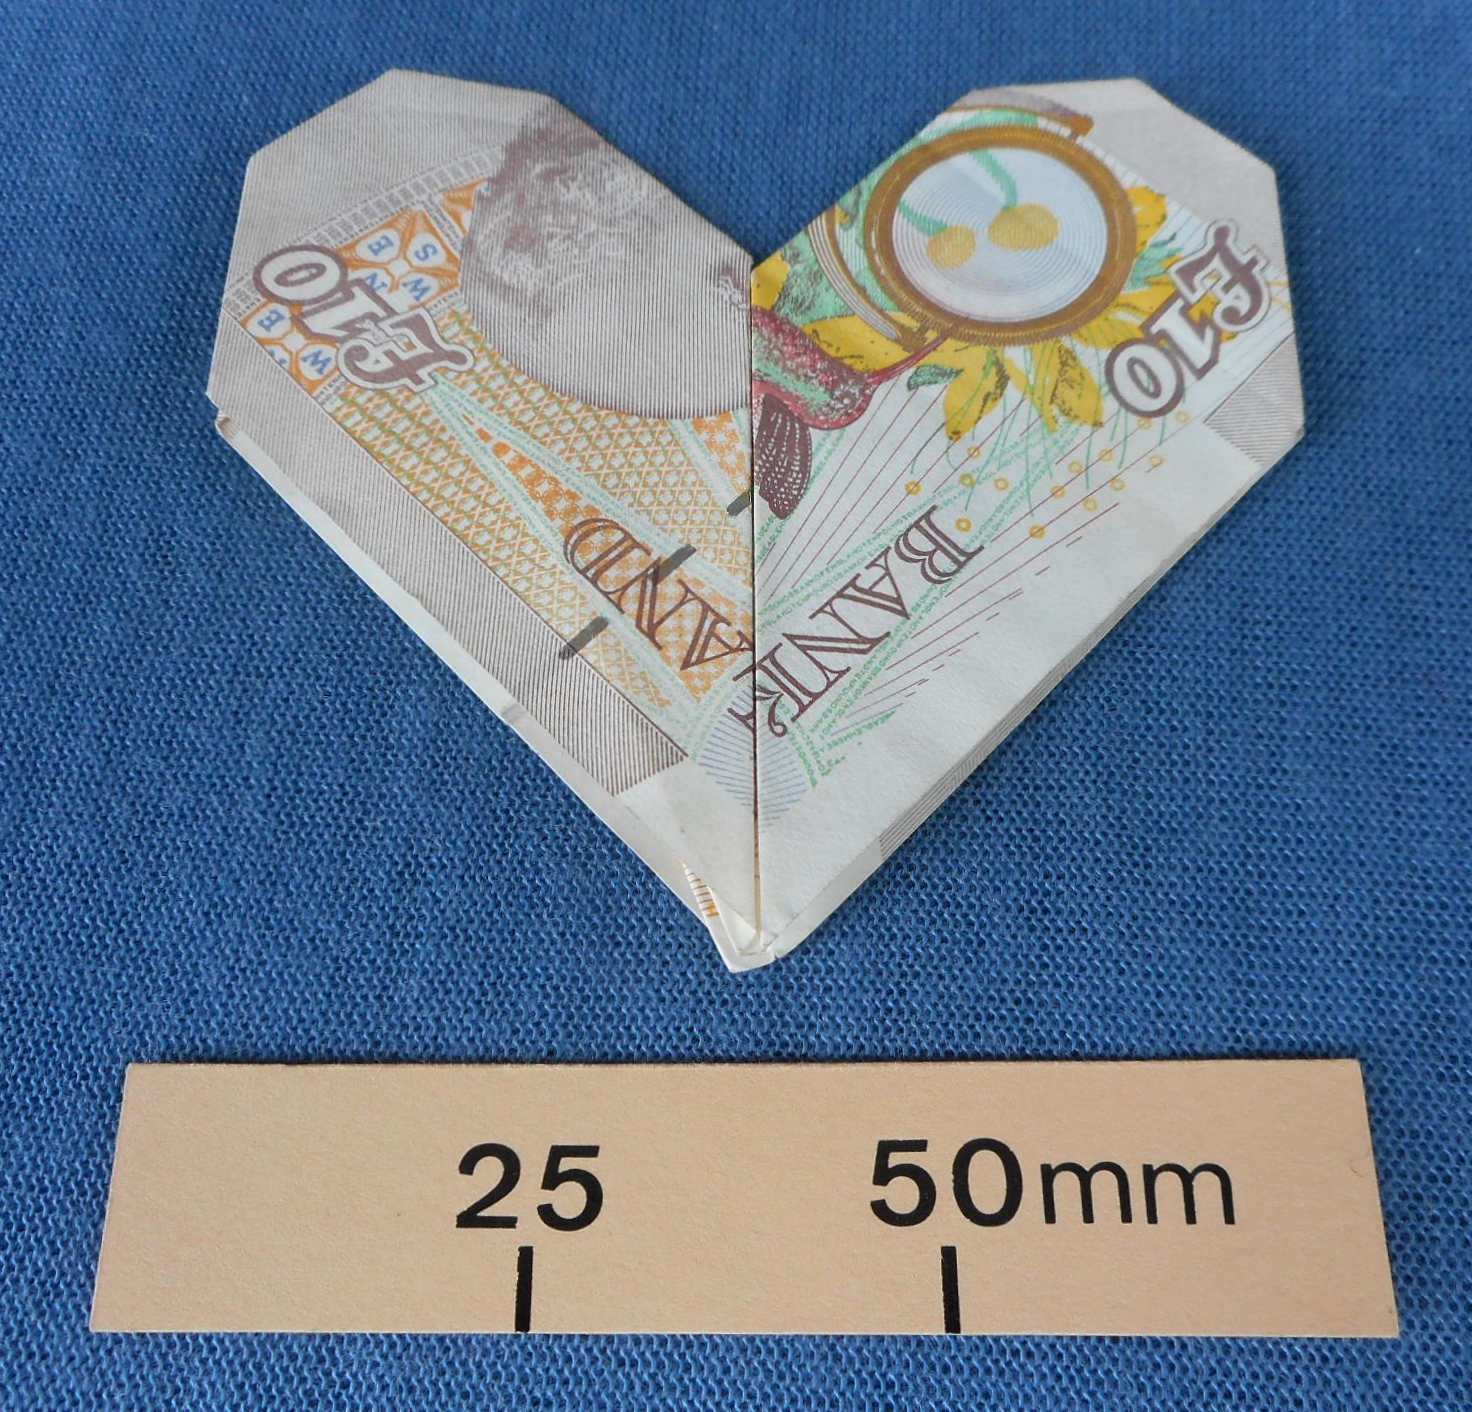 ‘Heart Homily’ origami item by Robert E Neale